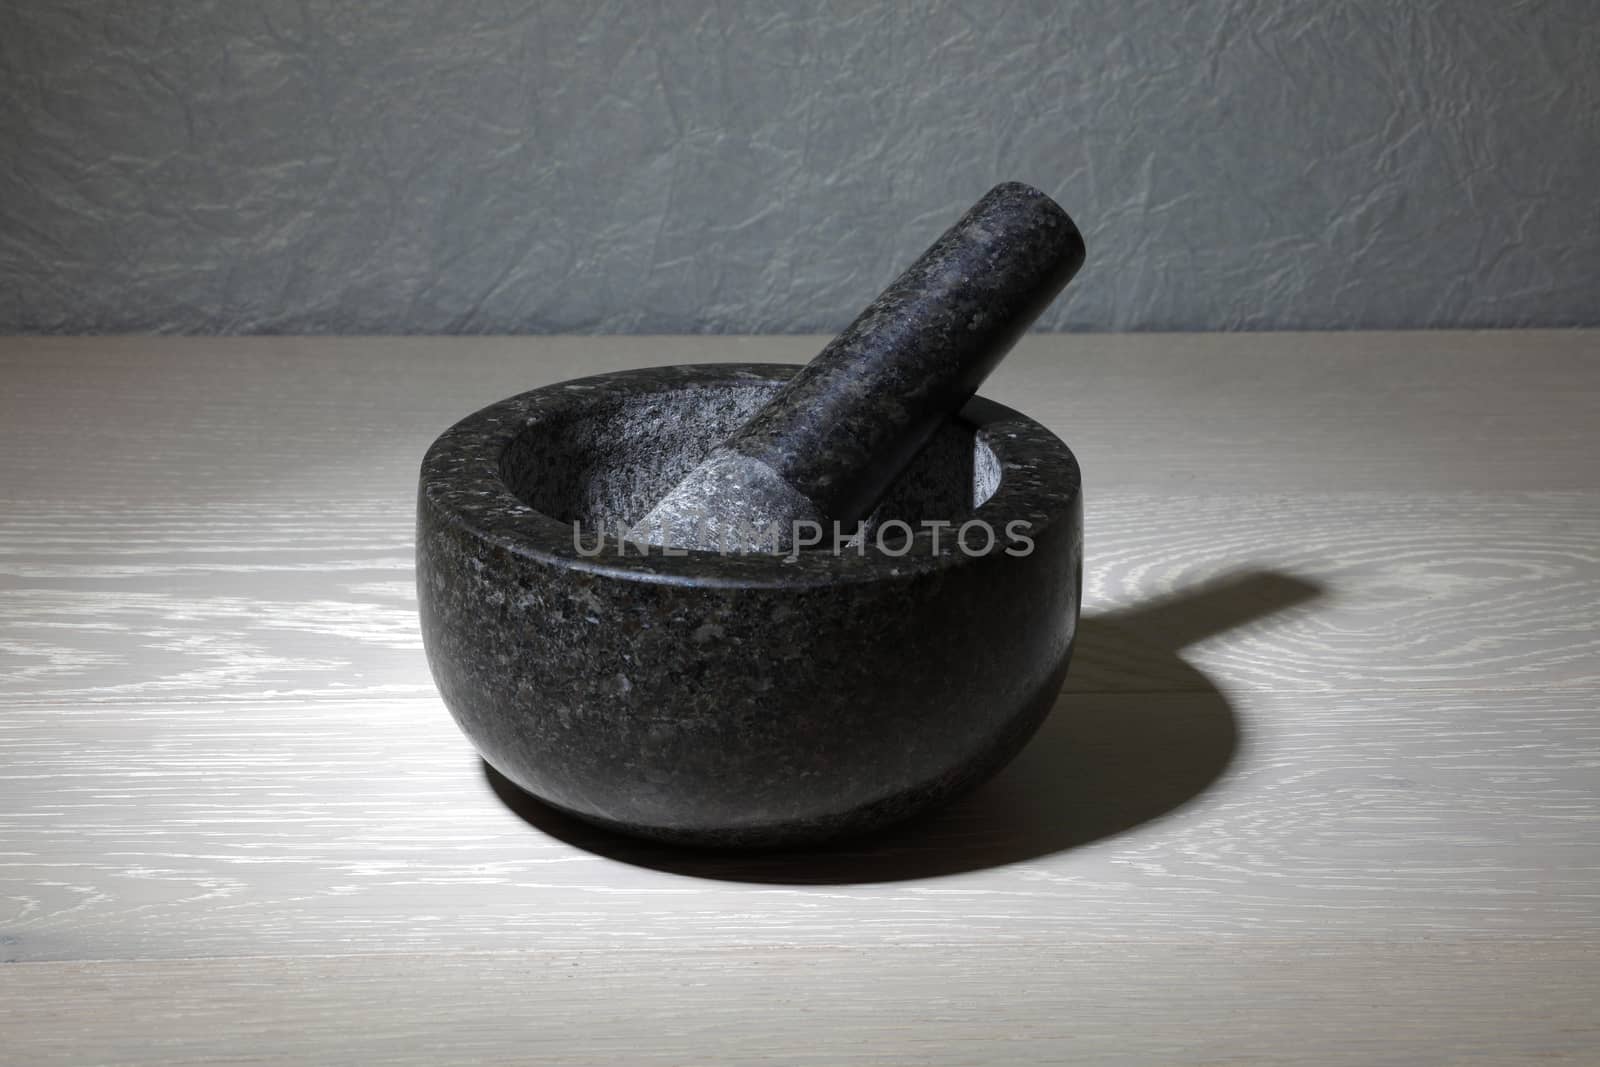 A mortar and pestle on kitchen work surface